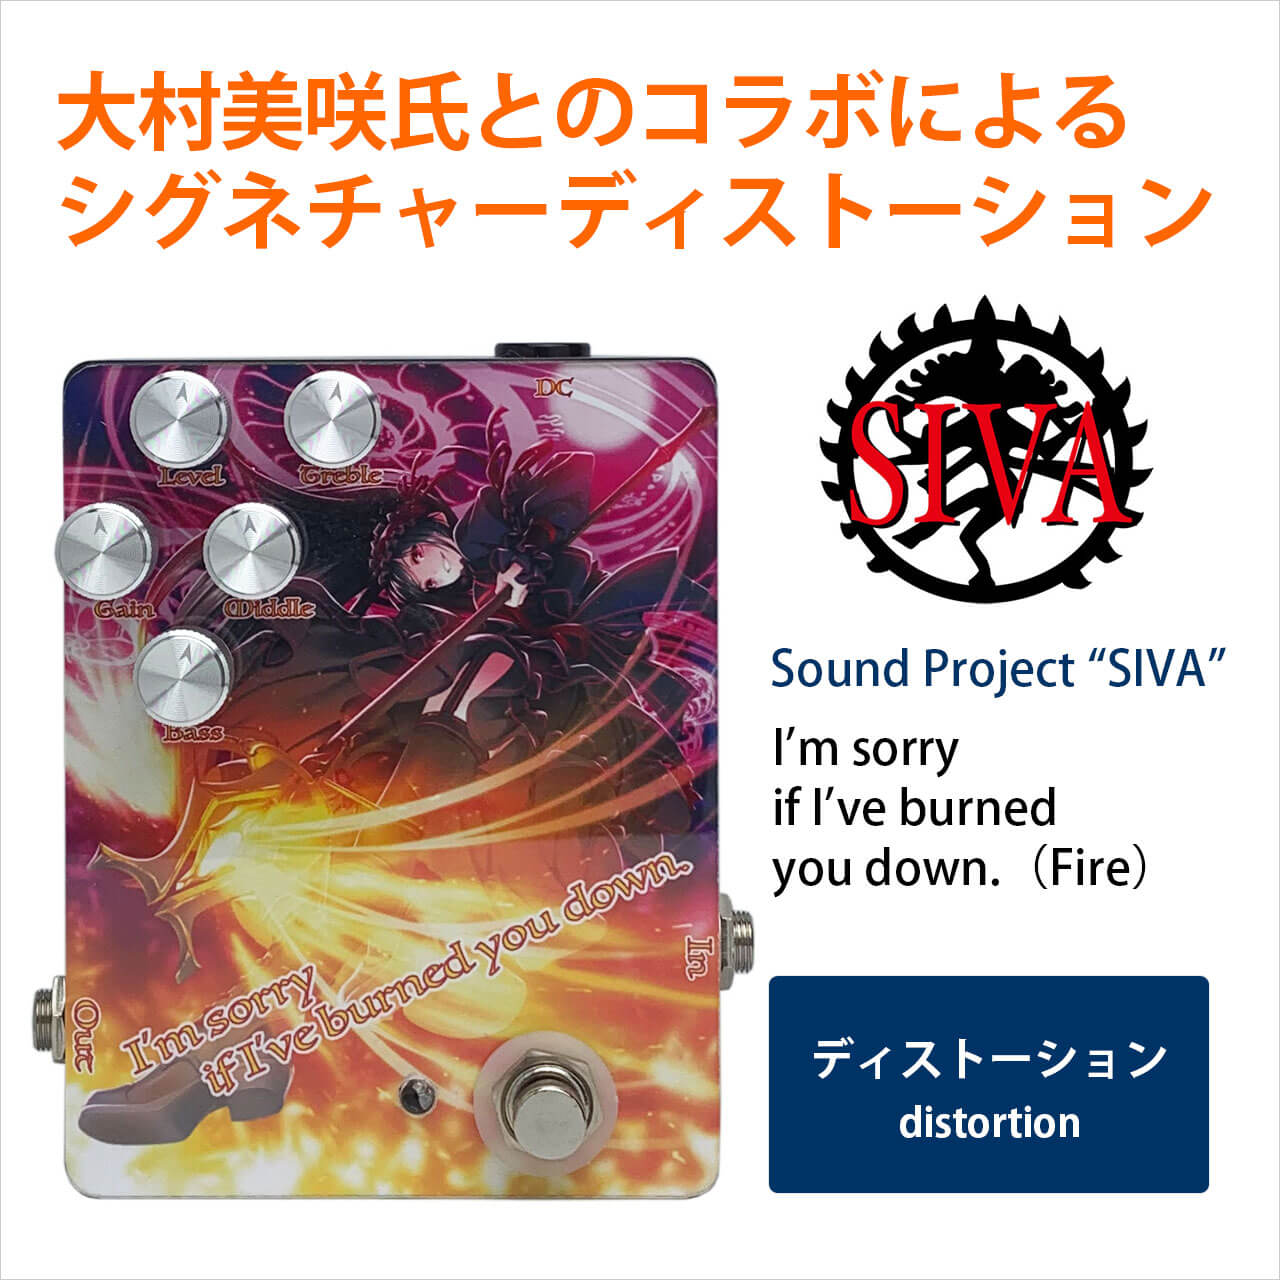 Sound Project “SIVA” サウンドプロジェクトシヴァ / Sound Project “SIVA” / I’m sorry if I’ve burned you down.（Fire）【ディストーション】